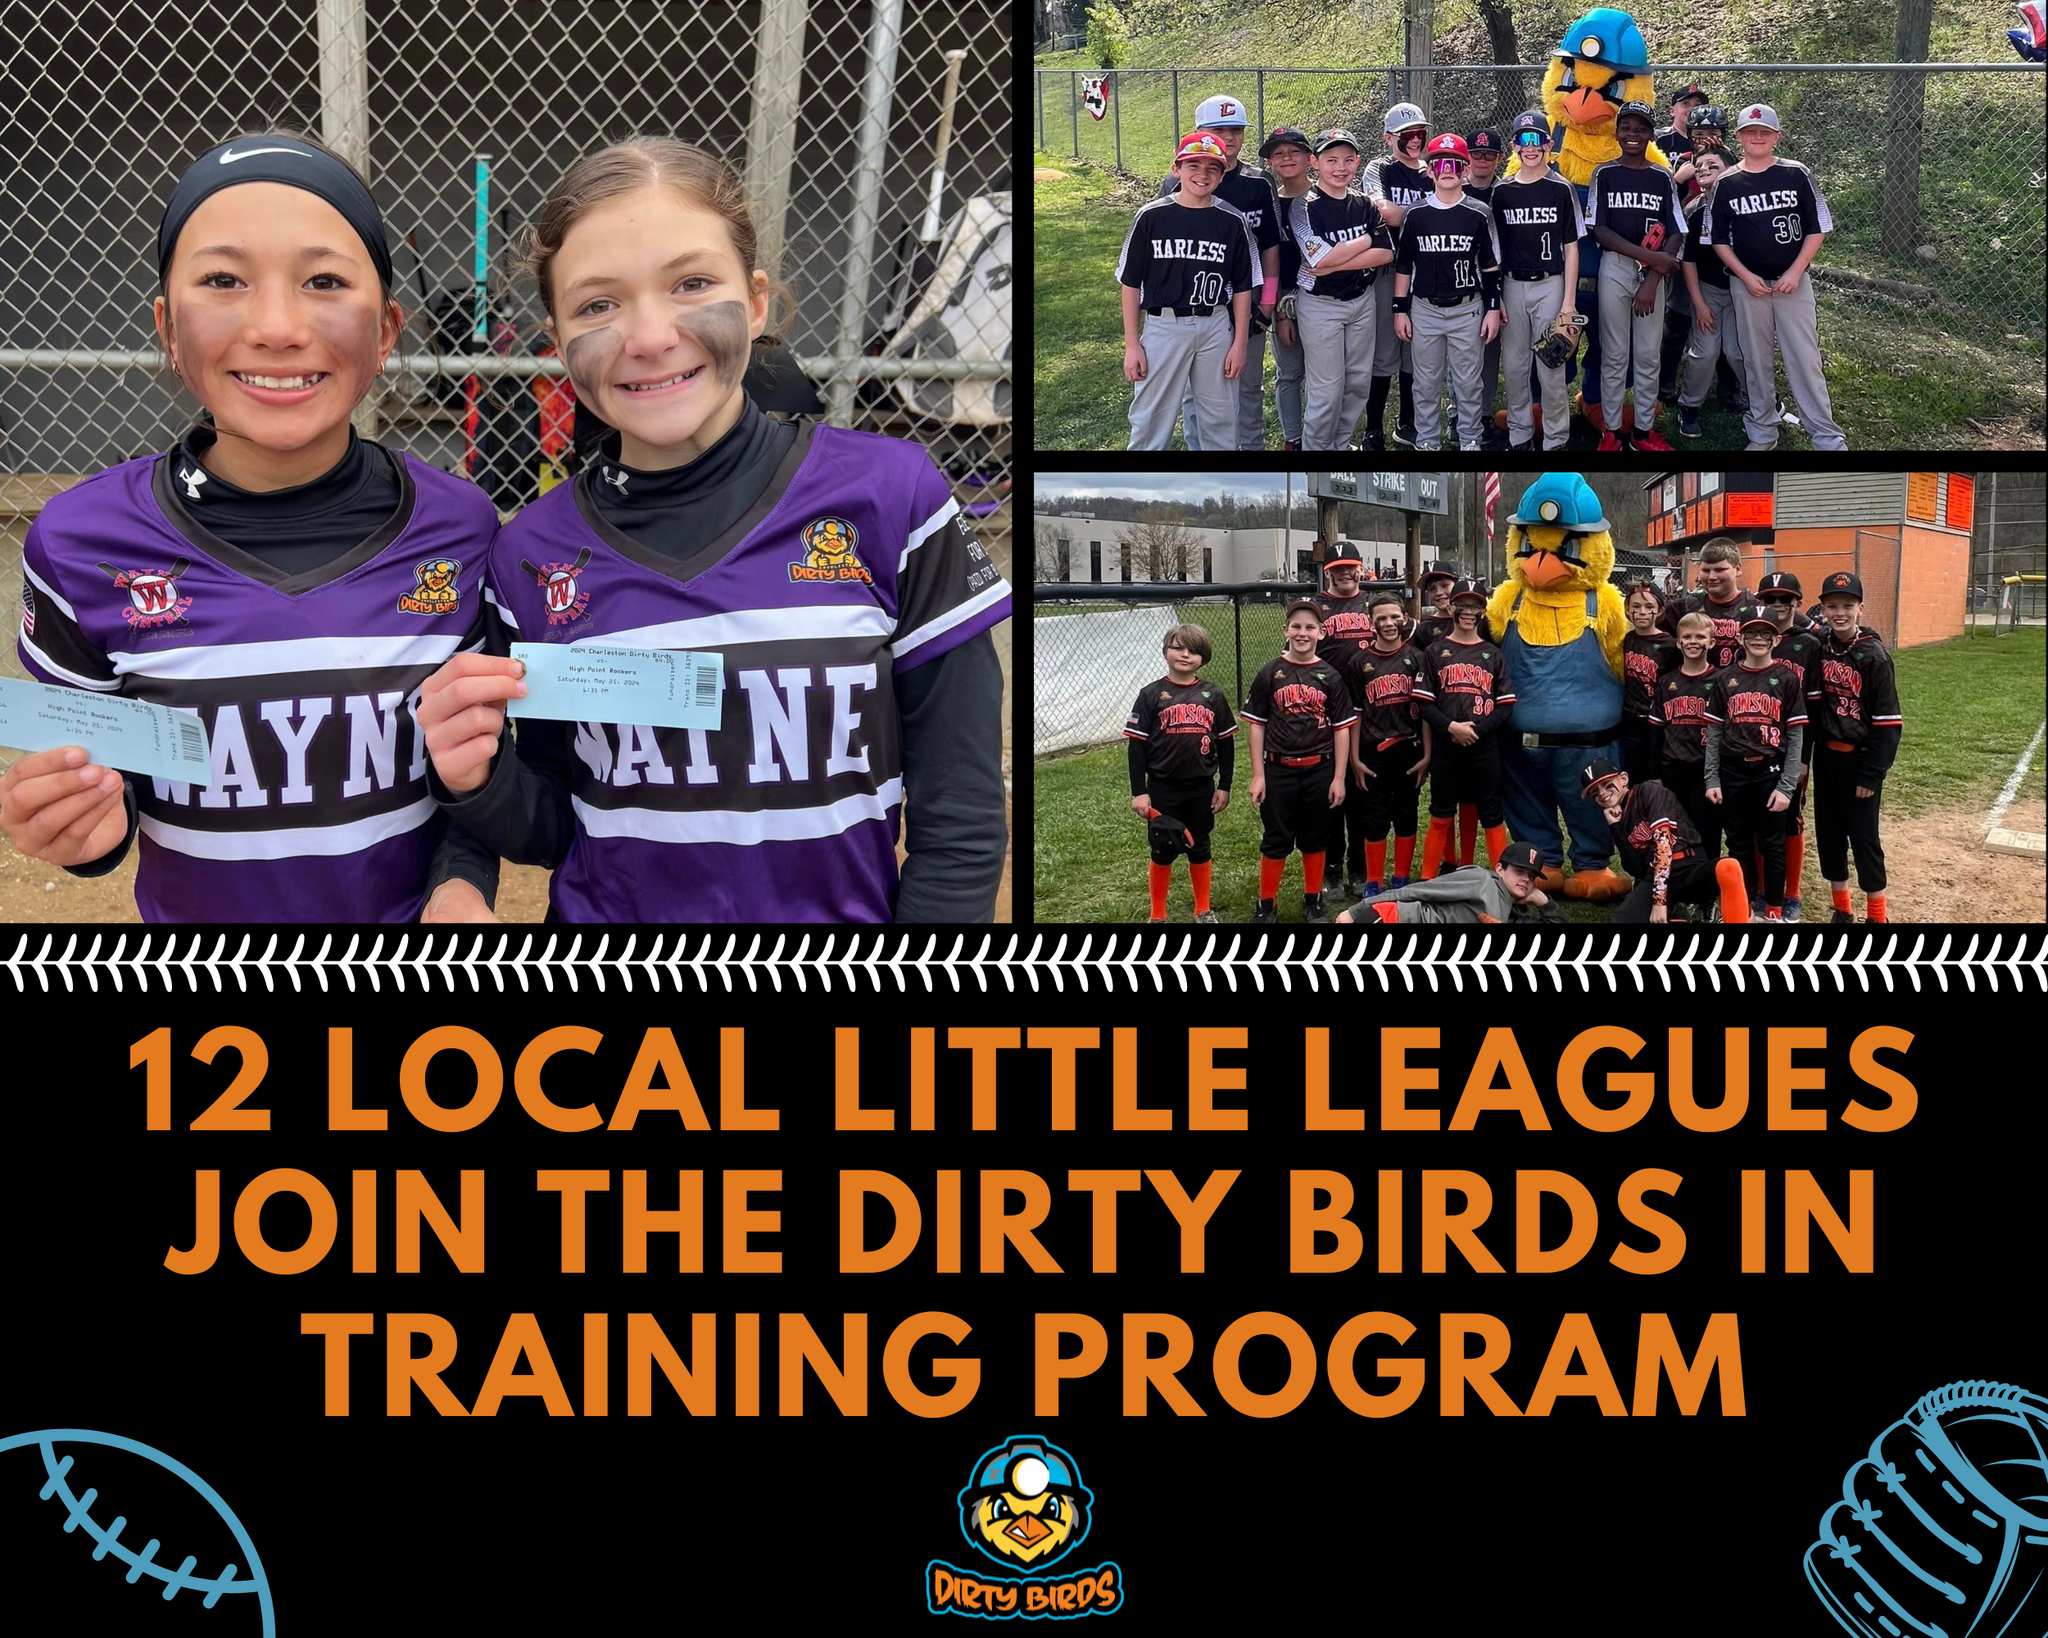 CHARLESTON DIRTY BIRDS DONATE OVER $75,000 TO LITTLE LEAGUES